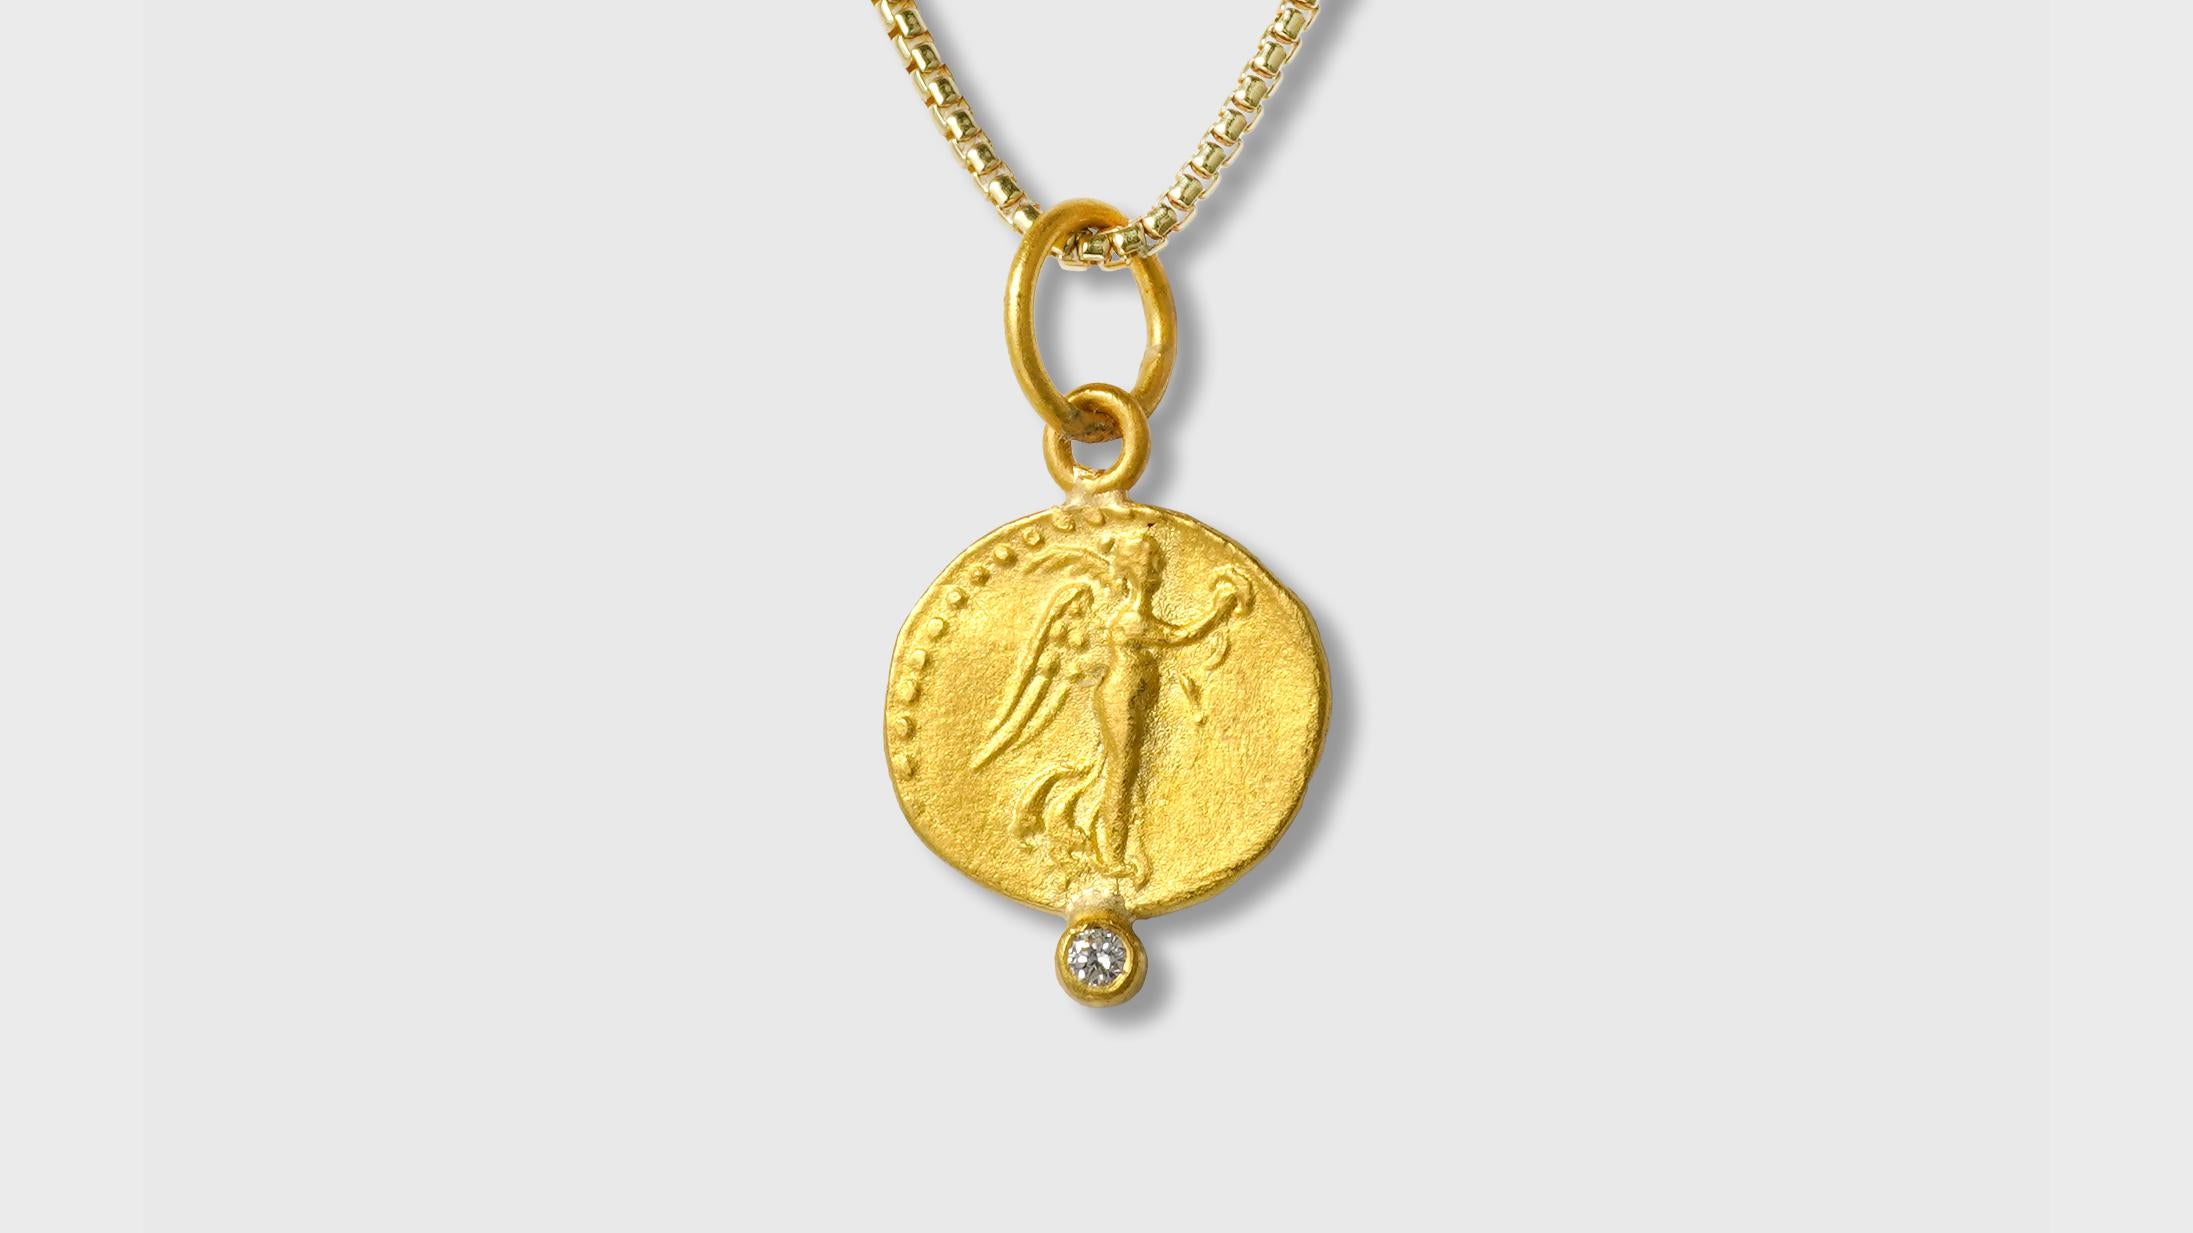 Ancient, Nike Charm Coin (Replica) Pendant with 0.02ct Diamond, 24kt Solid Gold In New Condition For Sale In Bozeman, MT